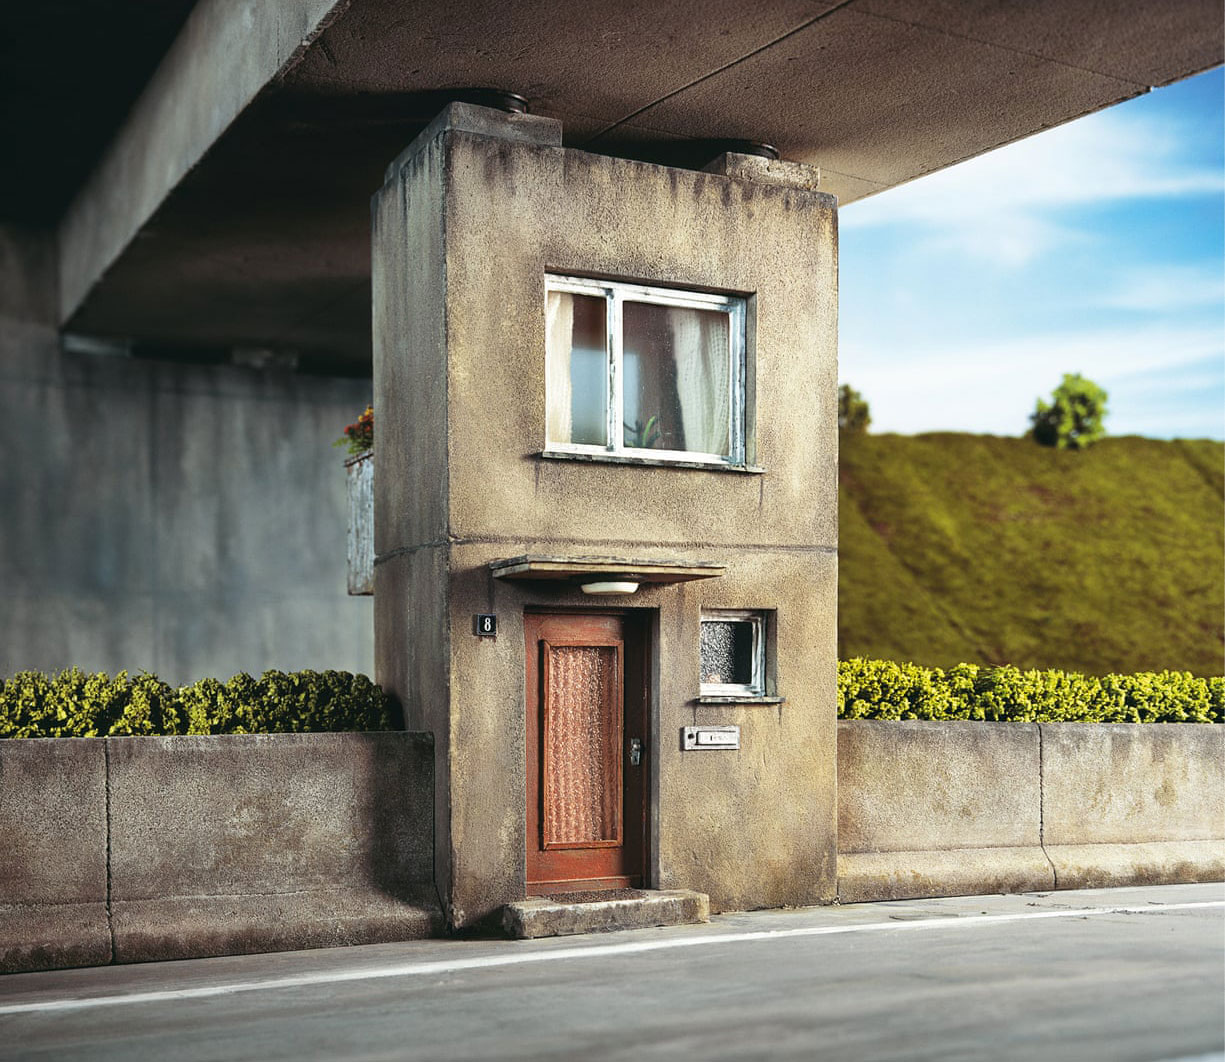 German photographer Frank Kunert is known for creating painstakingly detail...